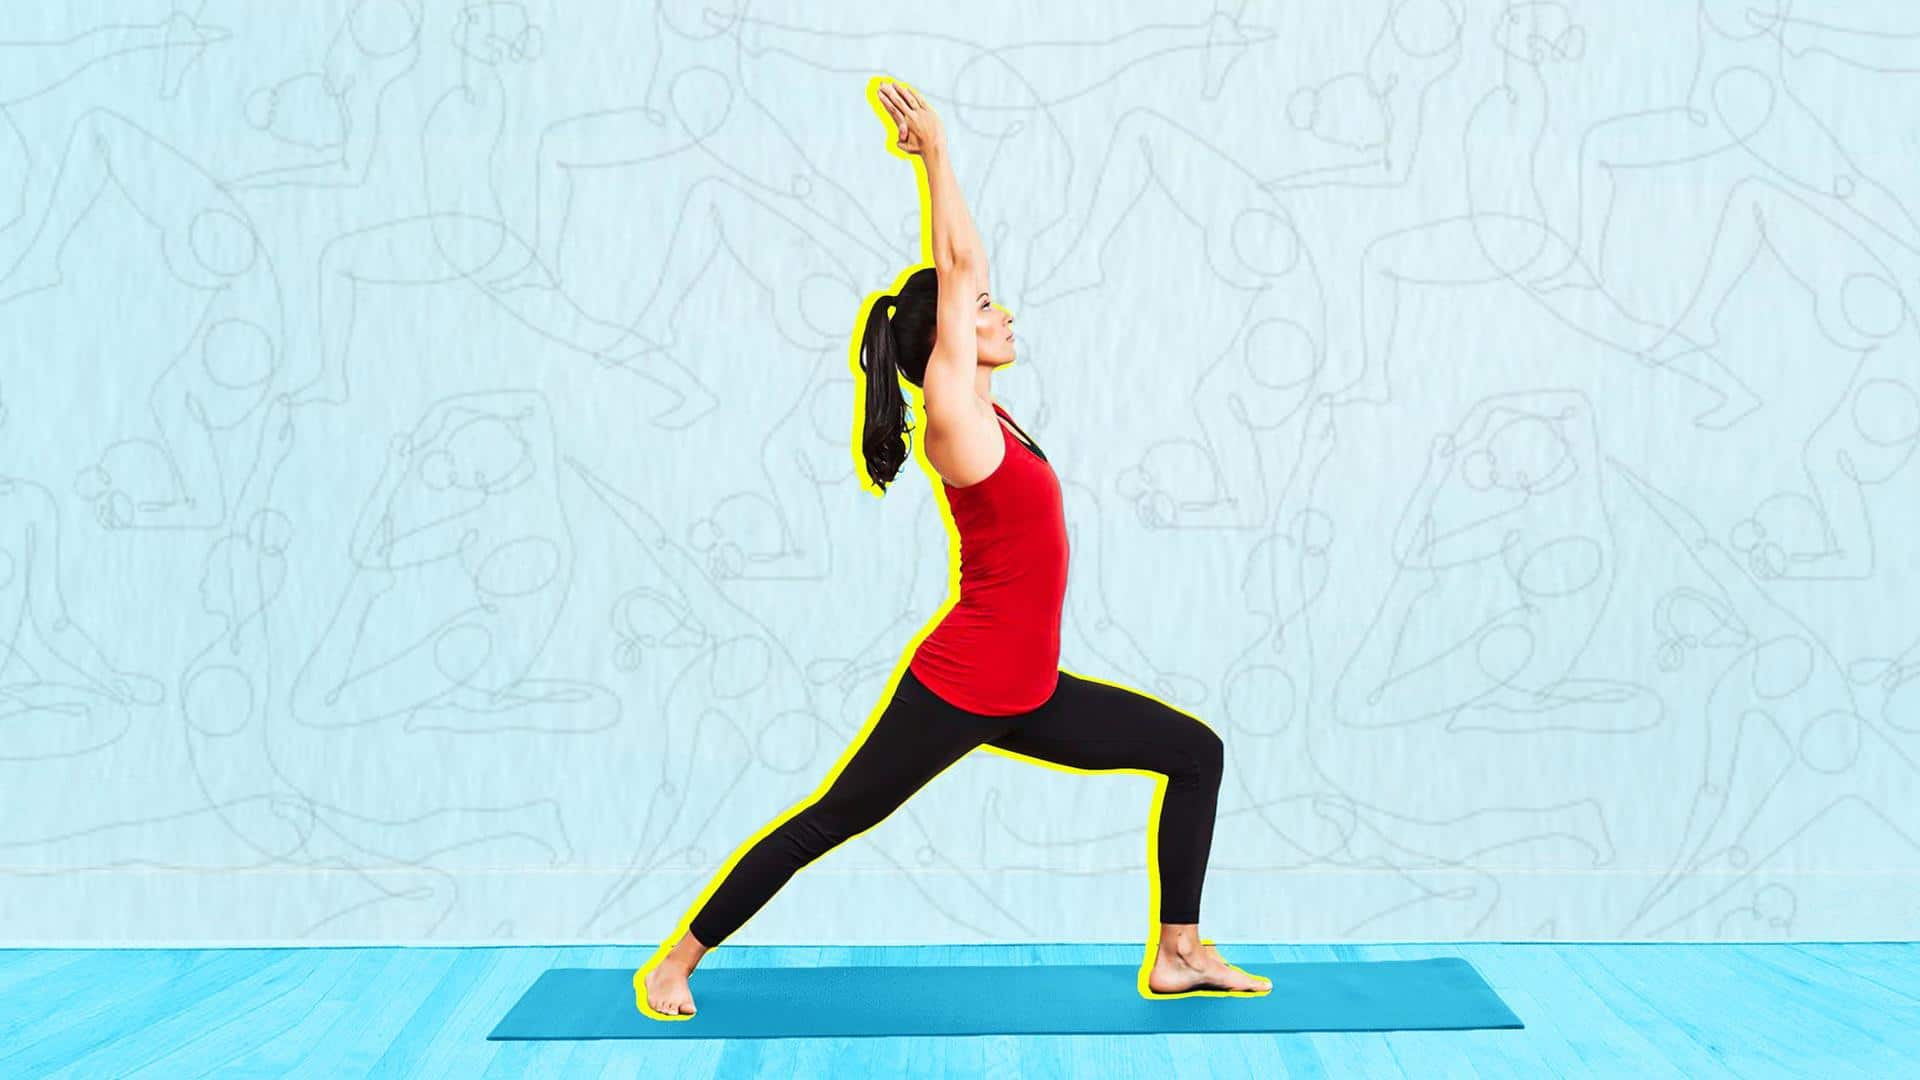 10 Yoga Asanas To Enhance Blood Circulation And Strengthen Your Immunity |  TheHealthSite.com